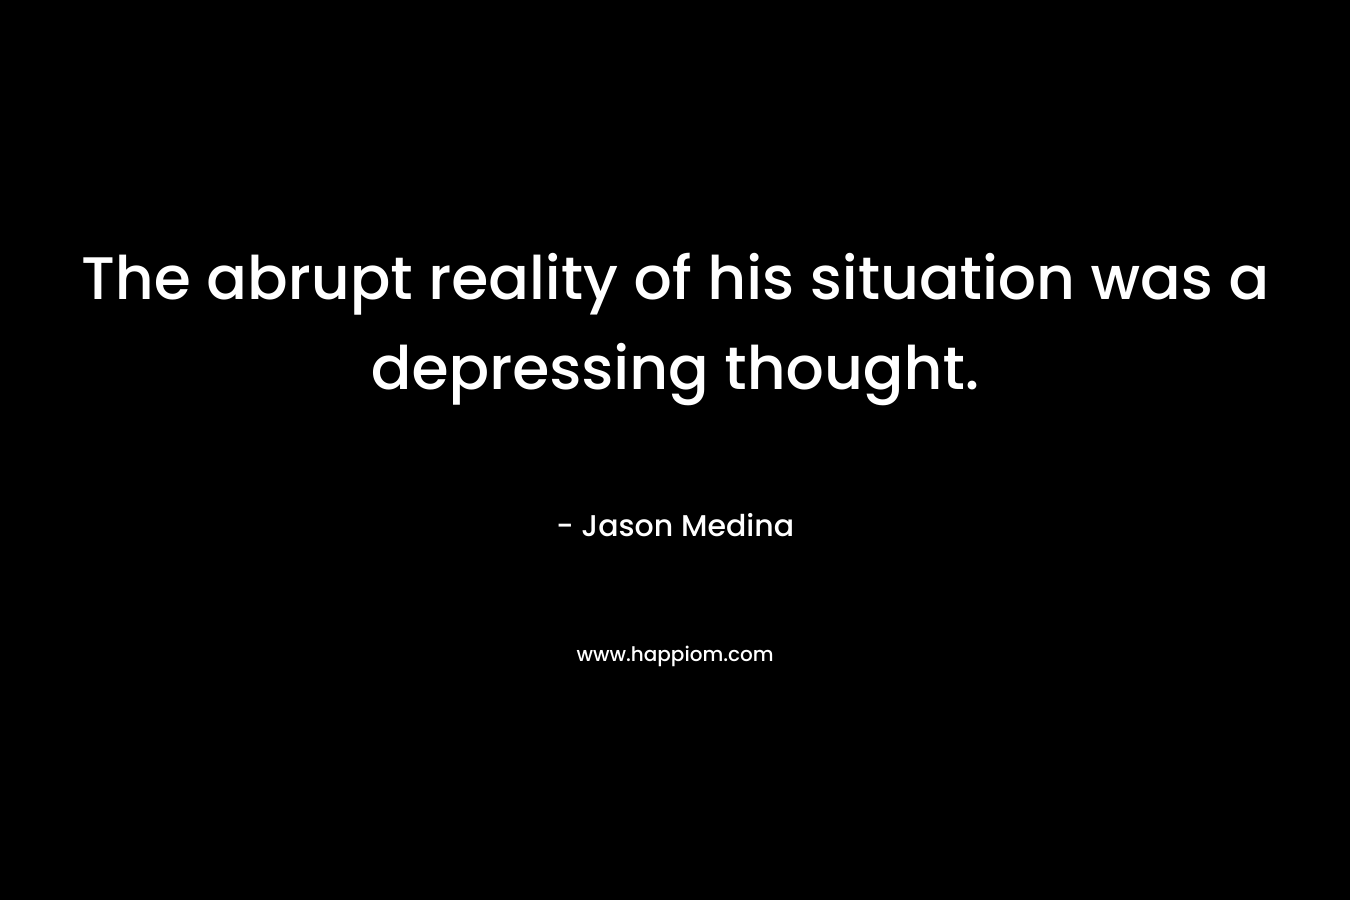 The abrupt reality of his situation was a depressing thought. – Jason Medina